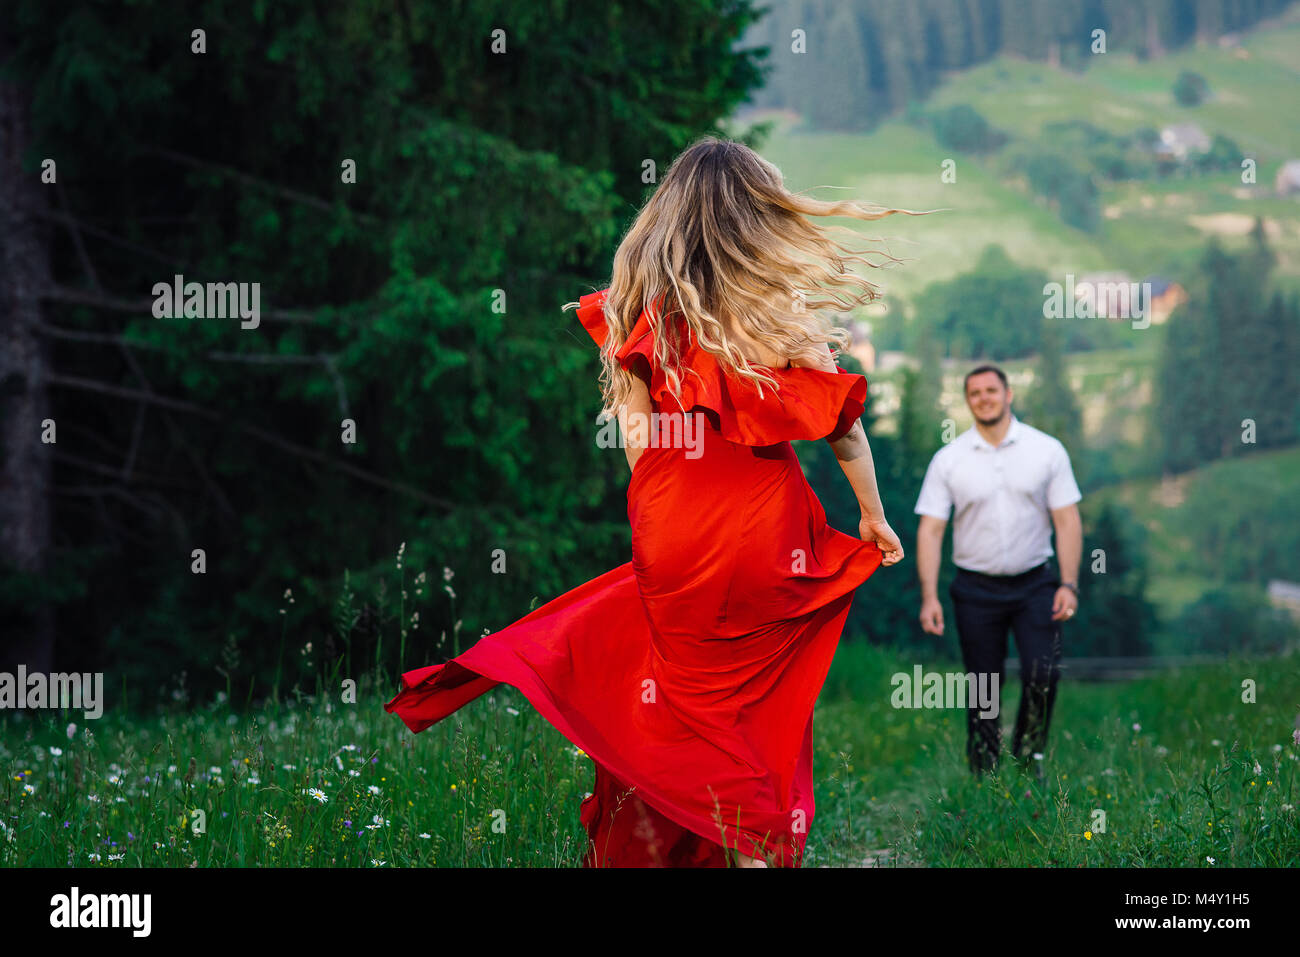 Back view of the elegant woman in long red dress with blonde curly hair spinning round at the blurred background of her groom in the green mountains. Stock Photo